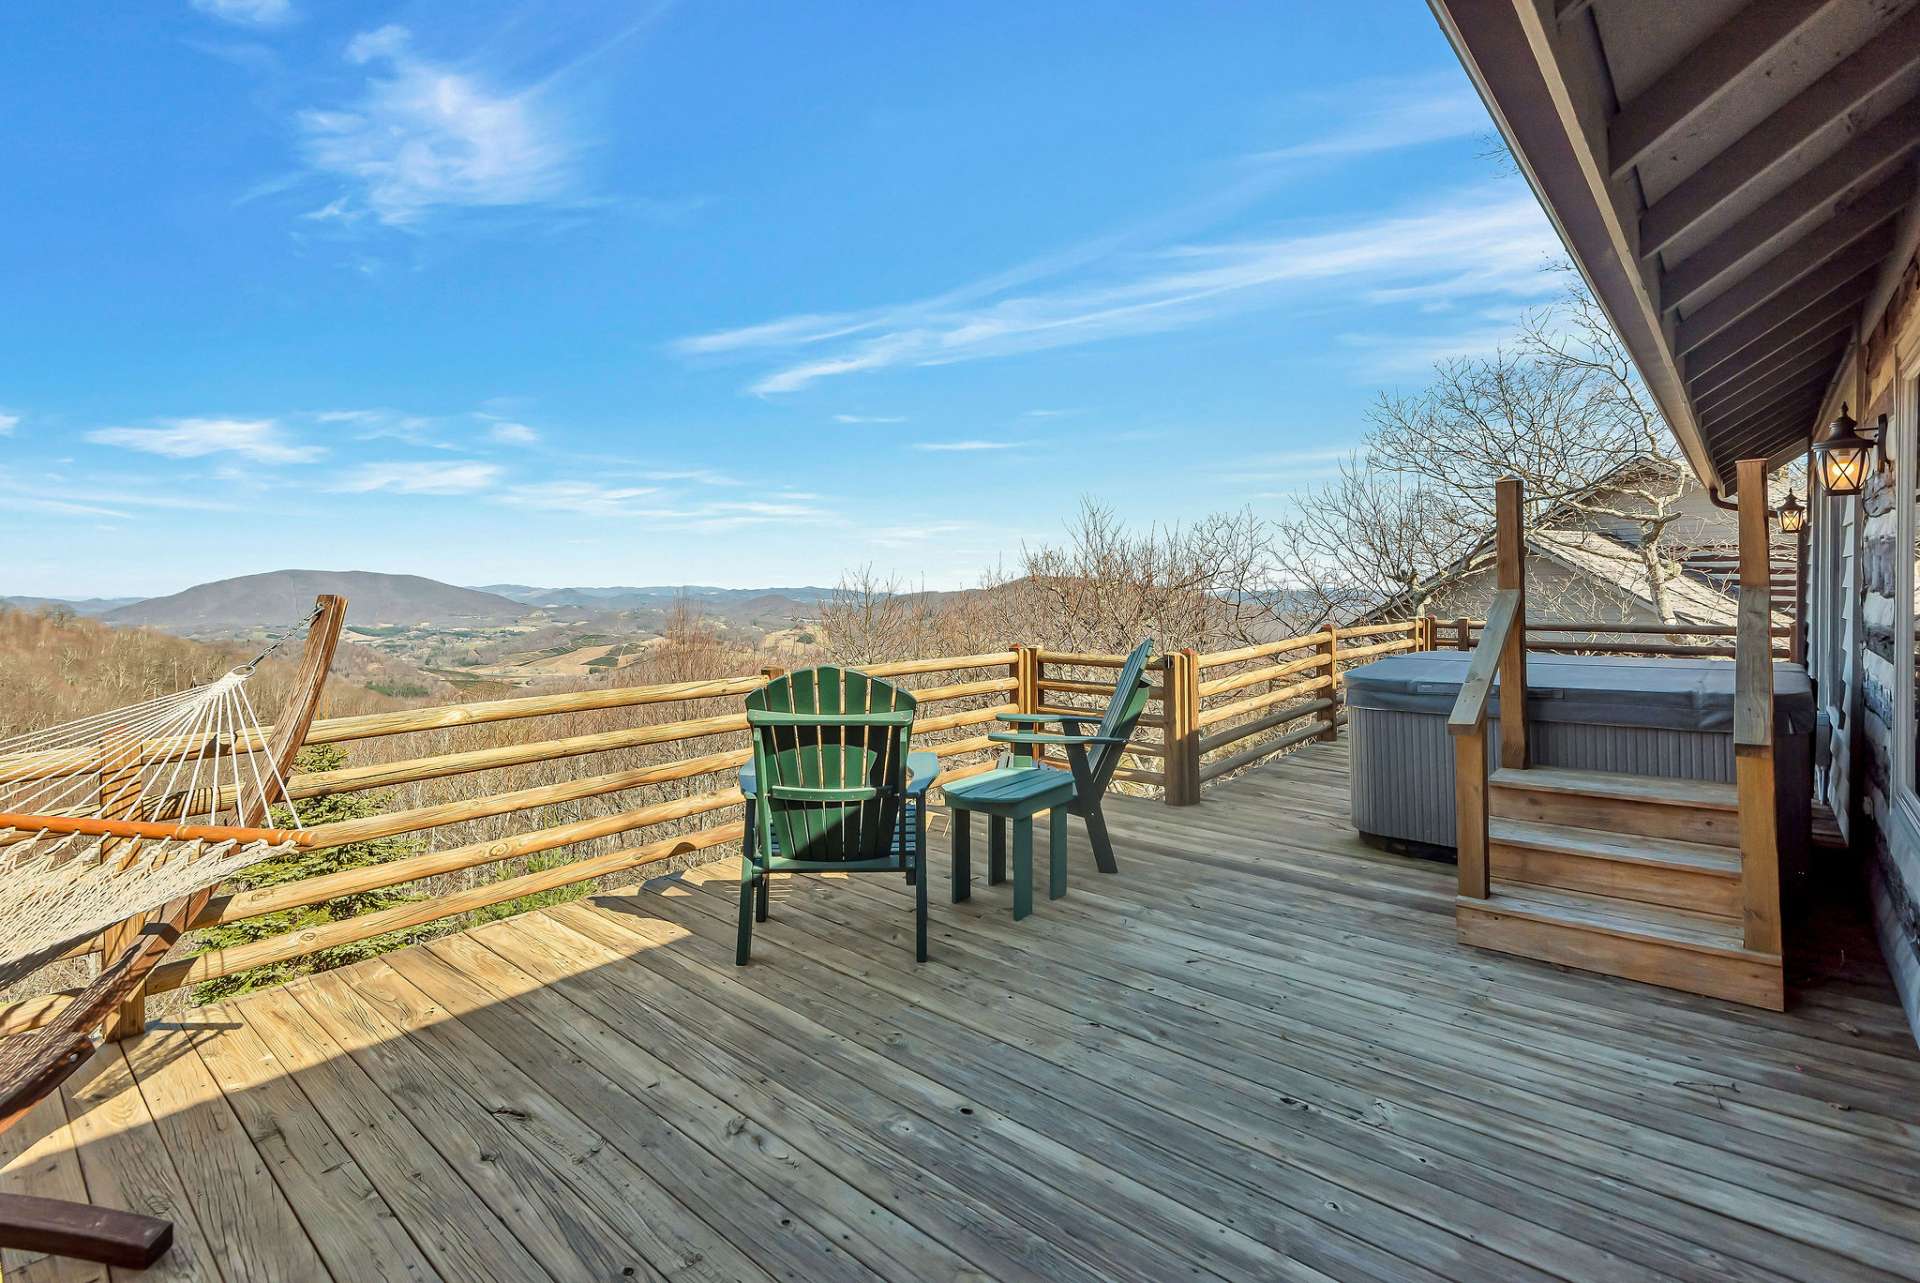 This mountain home beckons you to bask in the sunshine, blue sky and crisp breezes while enjoying views of Mount Jefferson in the distance.